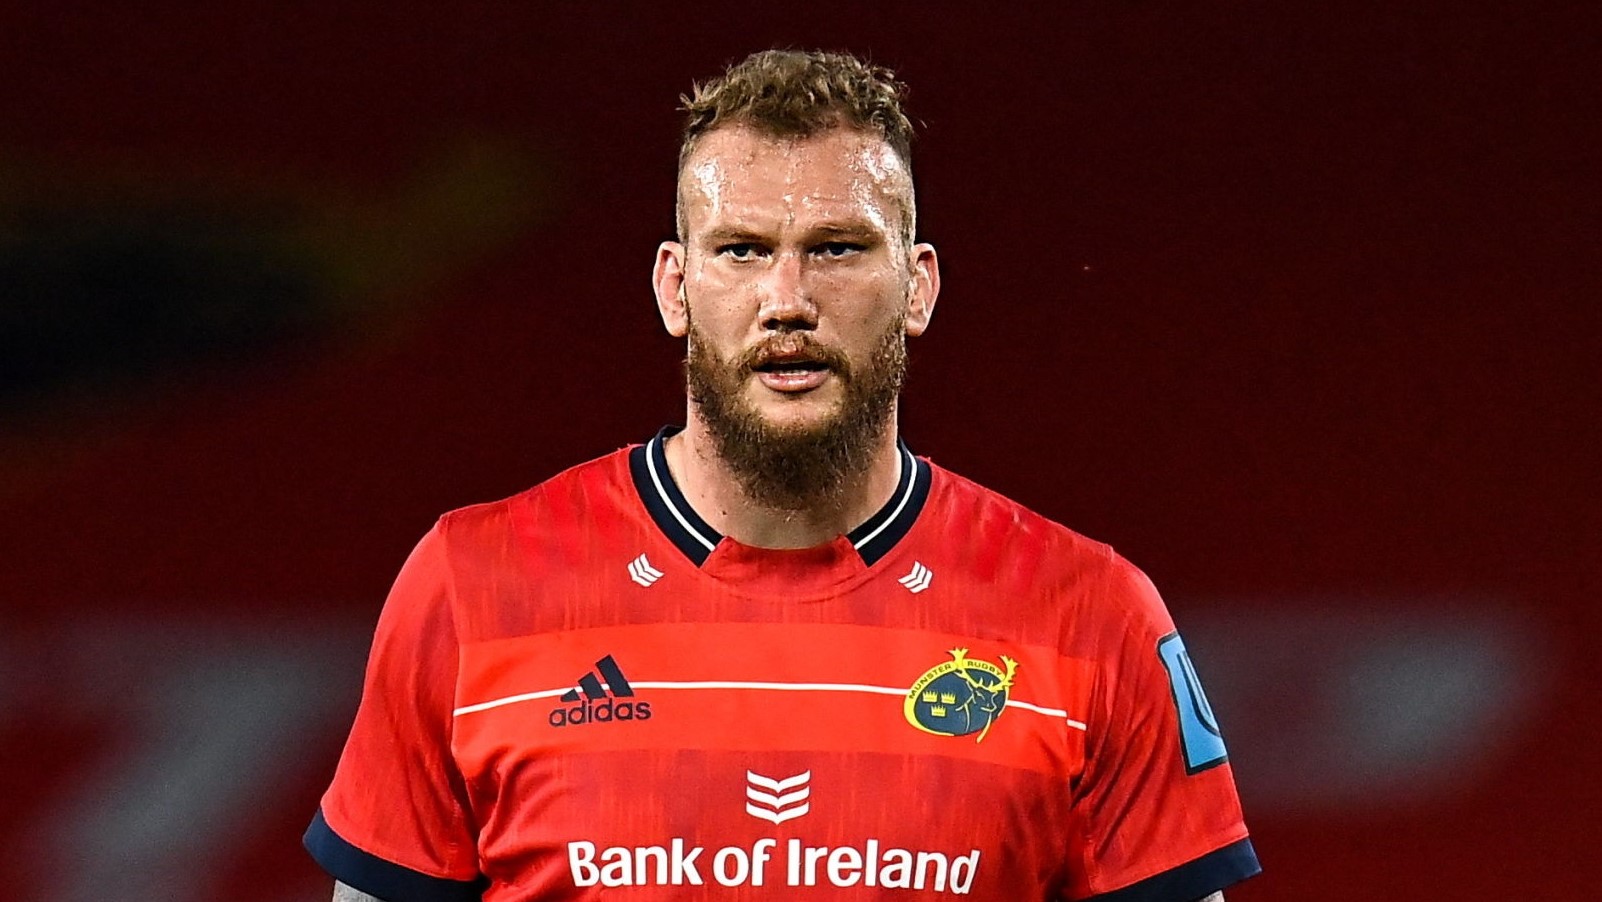 Limerick , Ireland - 25 September 2021; RG Snyman of Munster during the United Rugby Championship match between Munster and Cell C Sharks at Thomond Park in Limerick.